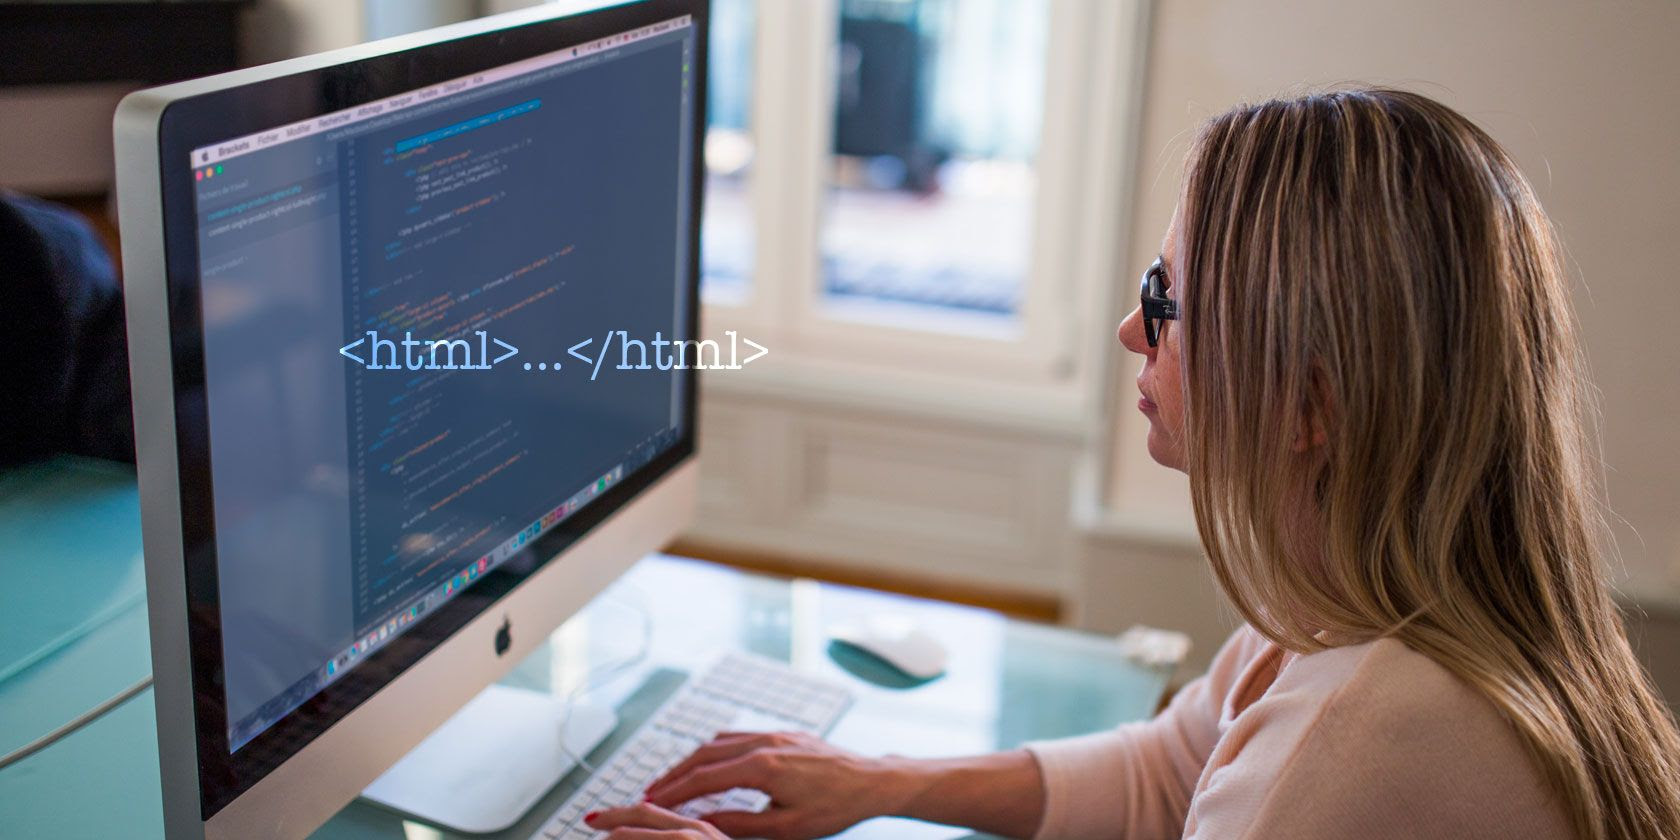 17 Simple HTML Code Examples You Can Learn in 10 Minutes